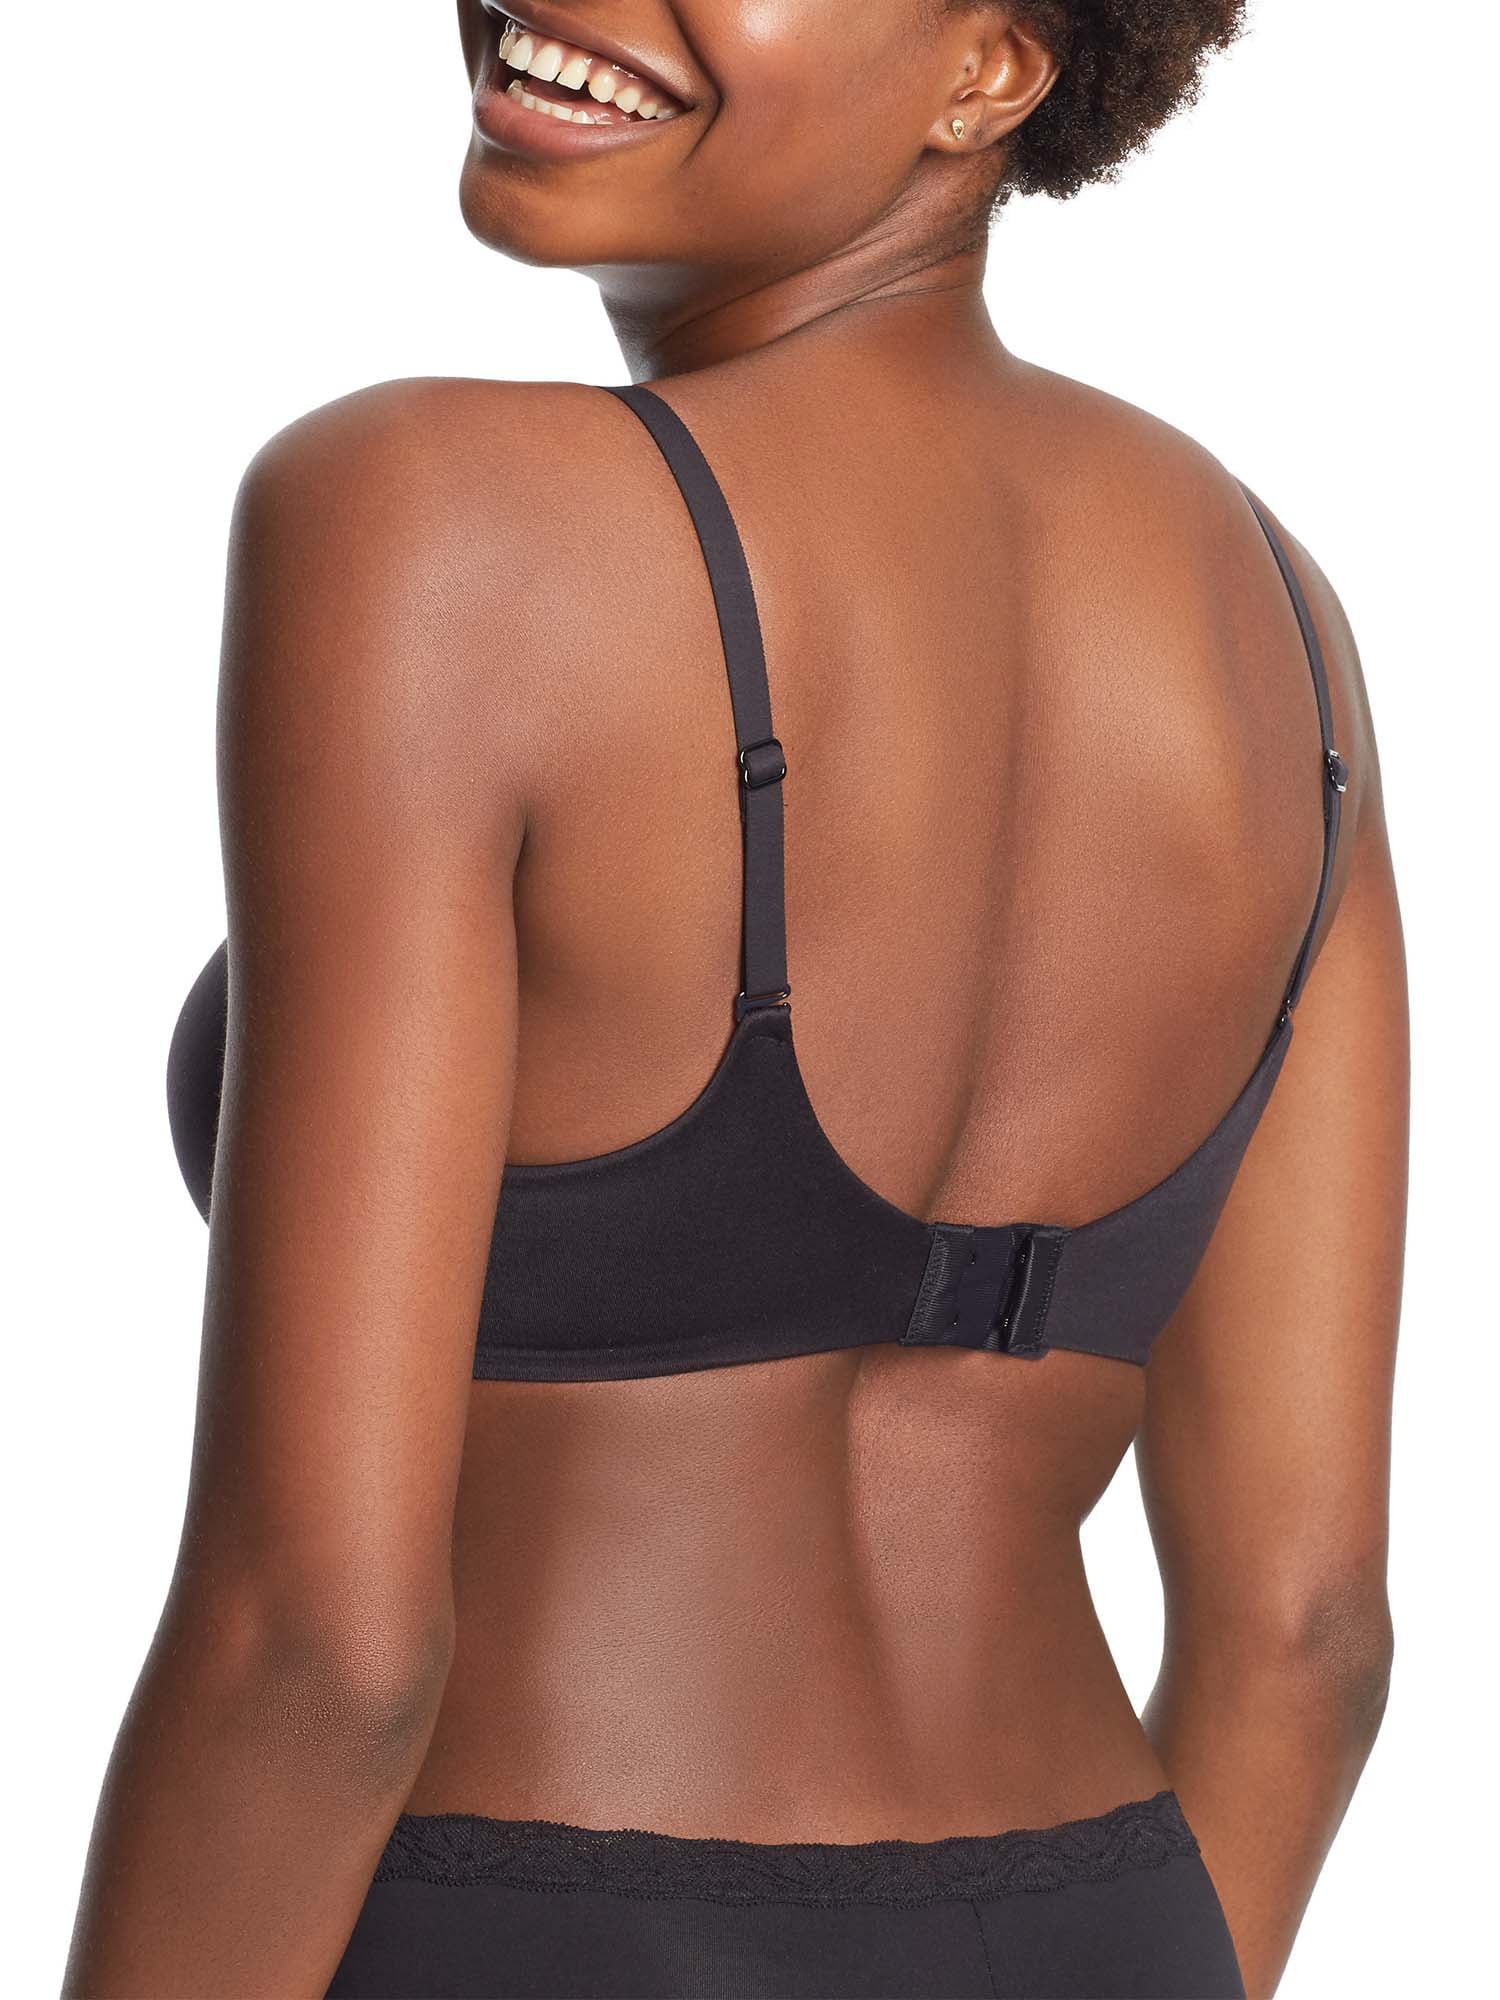 Fortitube Bra 36C Black Perfect Fit T-Shirt Padded Underwired New with Tags  - Against Breast Cancer